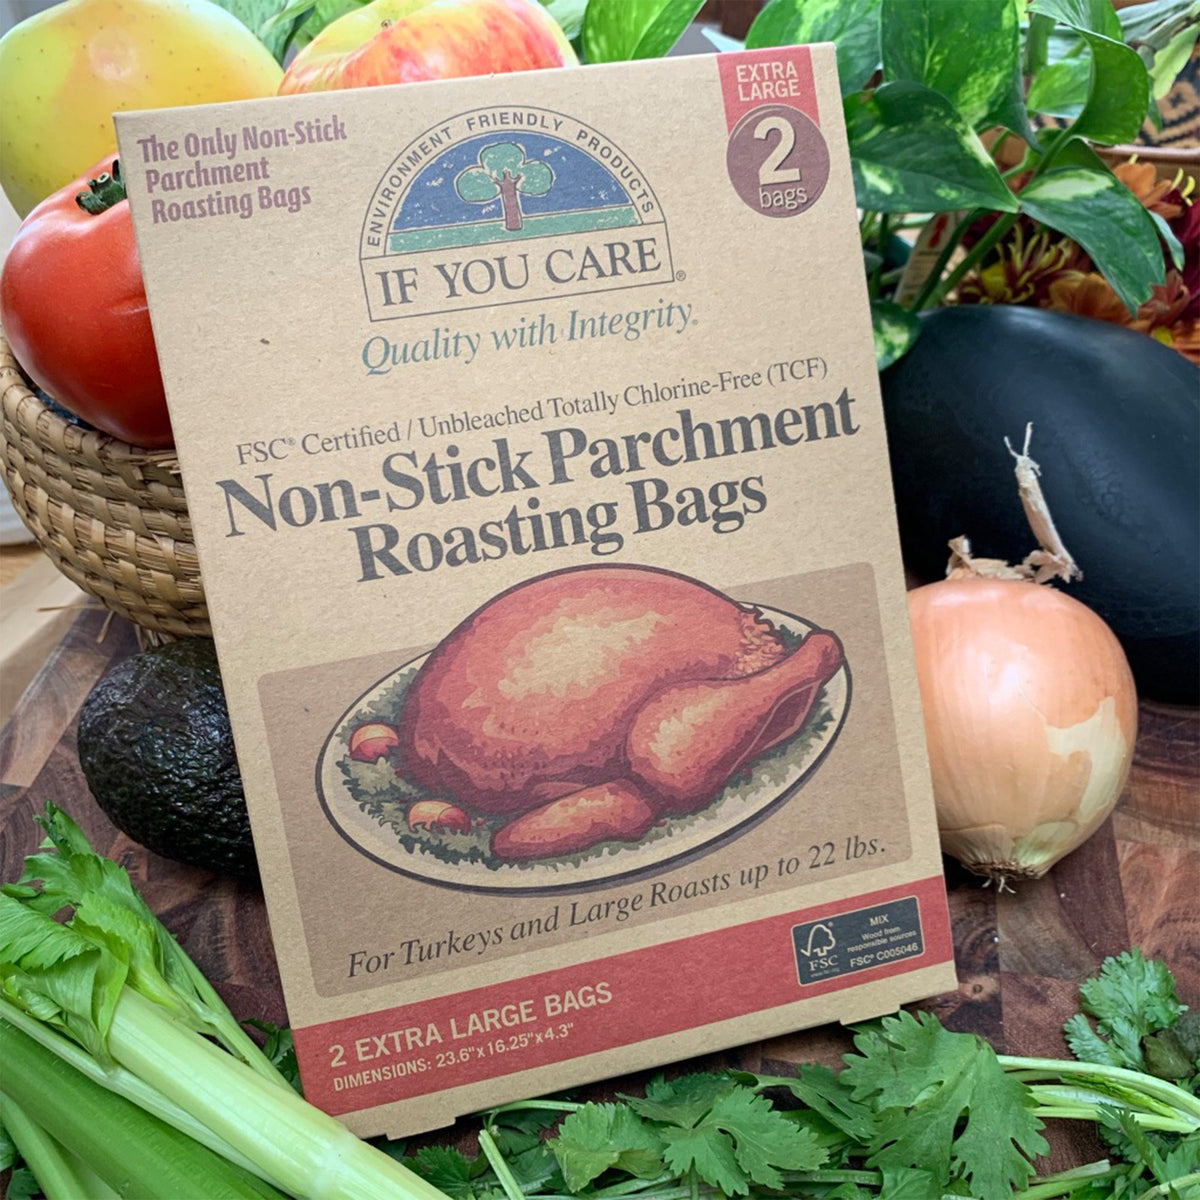 non-stick parchment roasting bags in package. 2 extra large bags. bags are 23.6&quot; x 16.25&quot; x 4.3&quot; displayed on bed of vegetables